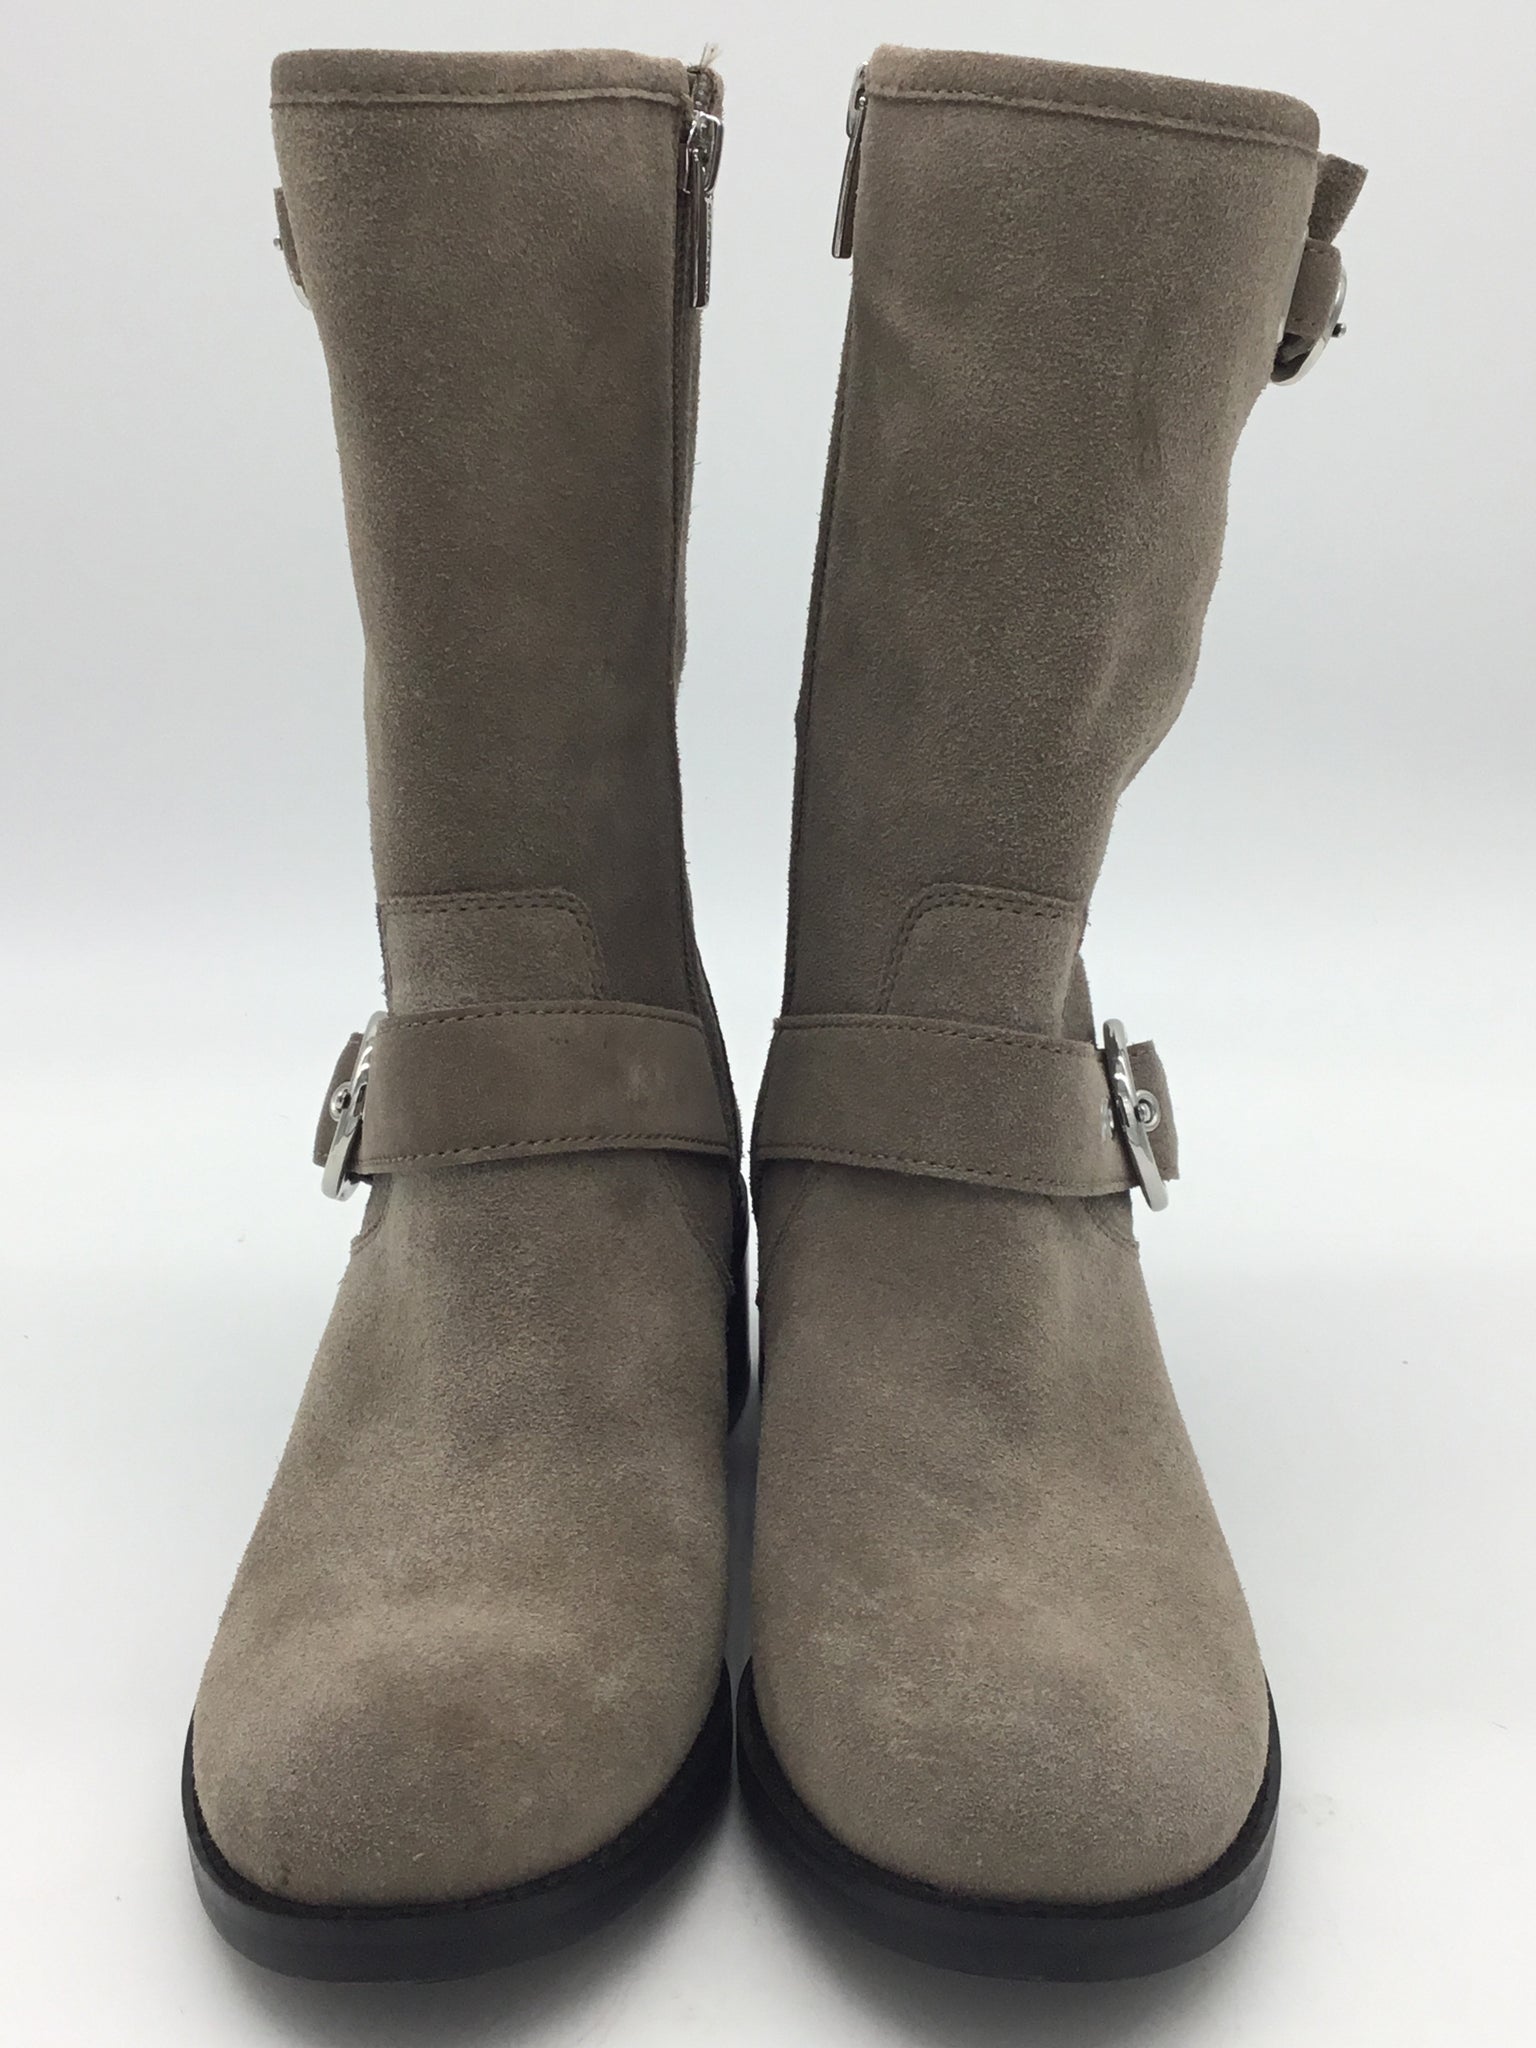 VINCE CAMUTO Size 7 Taupe Boots